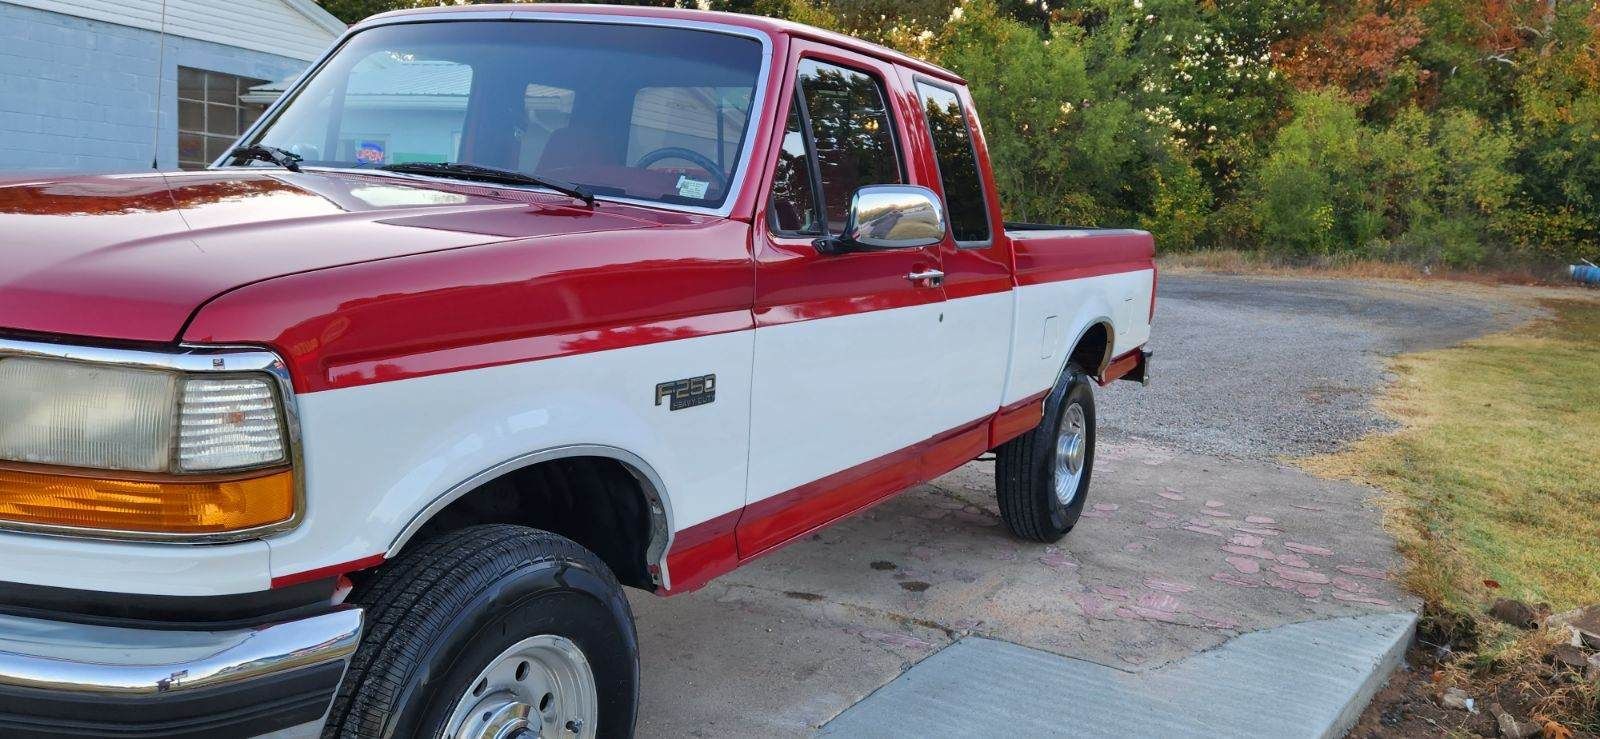 a repainted red and white pickup truck is parked on the side of the road.